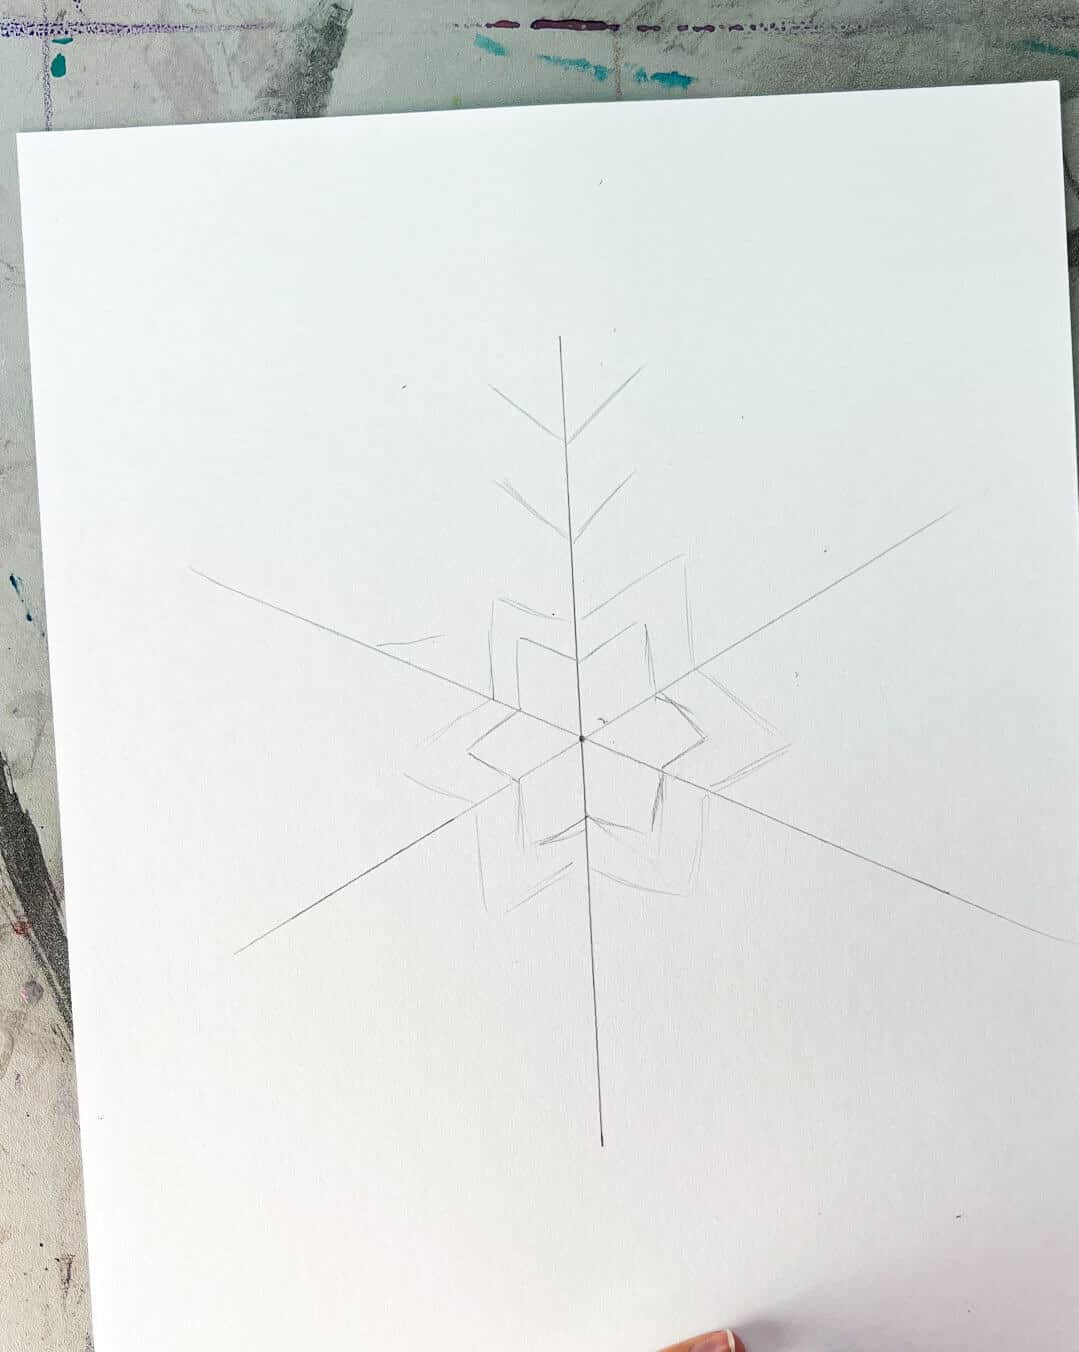 more lines added to snowflake design.